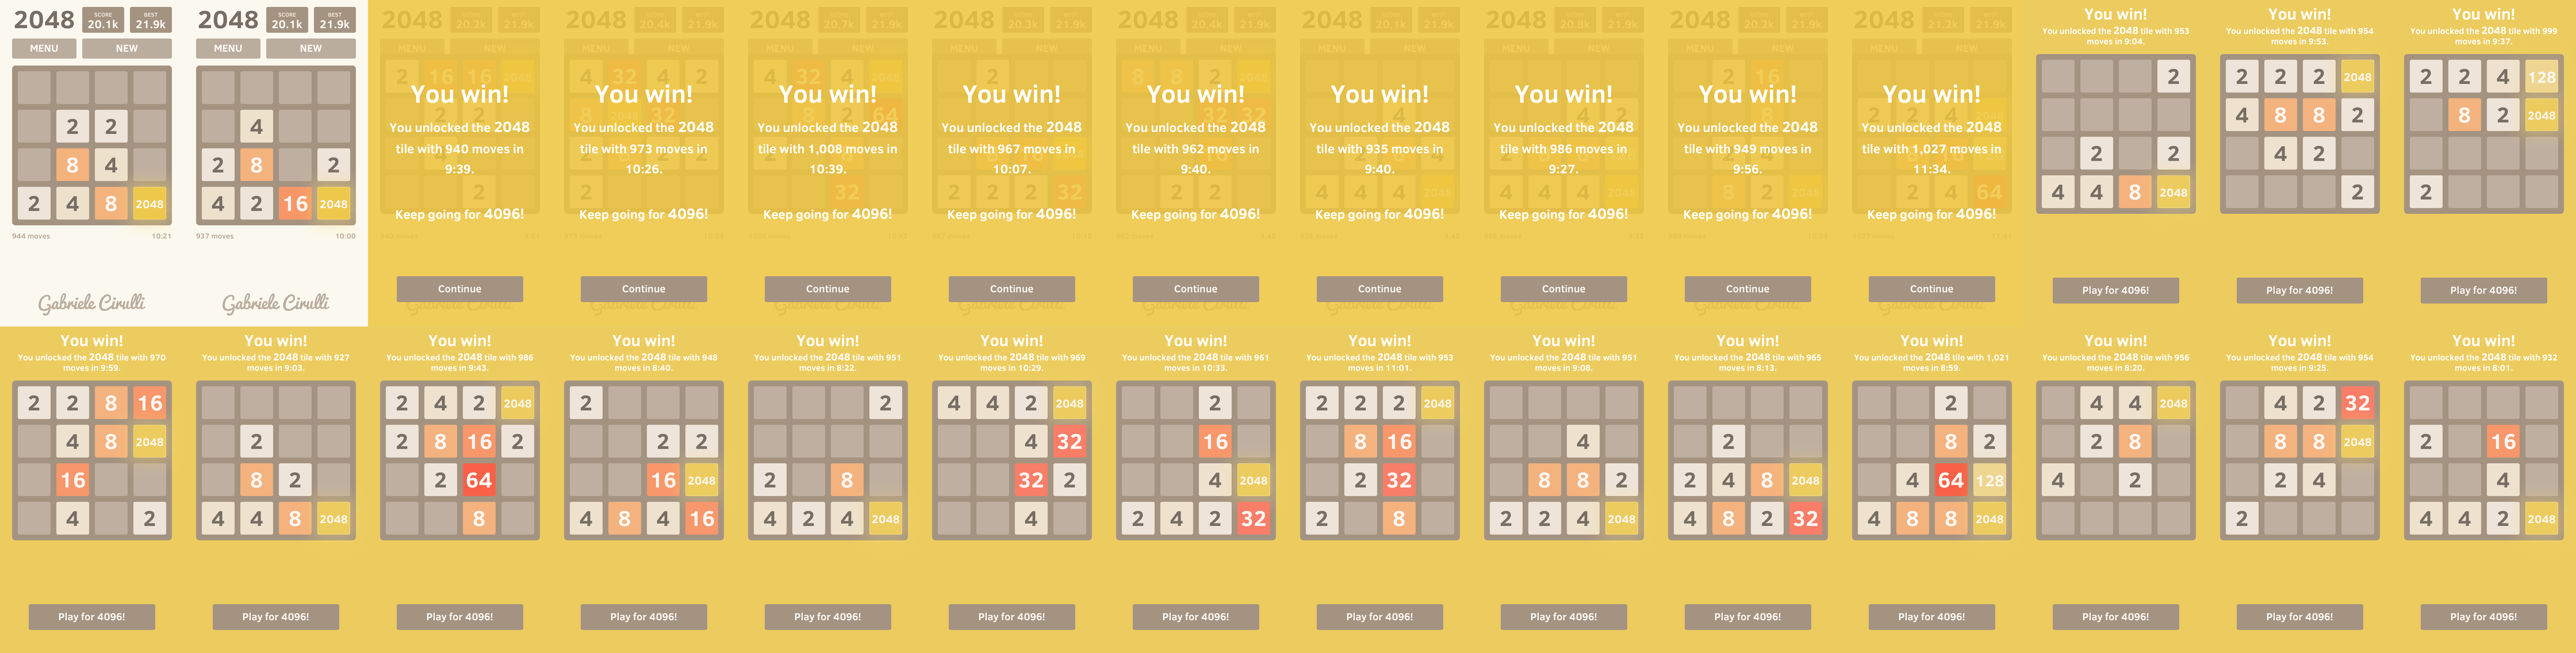 Montage of 28 winning games of 2048